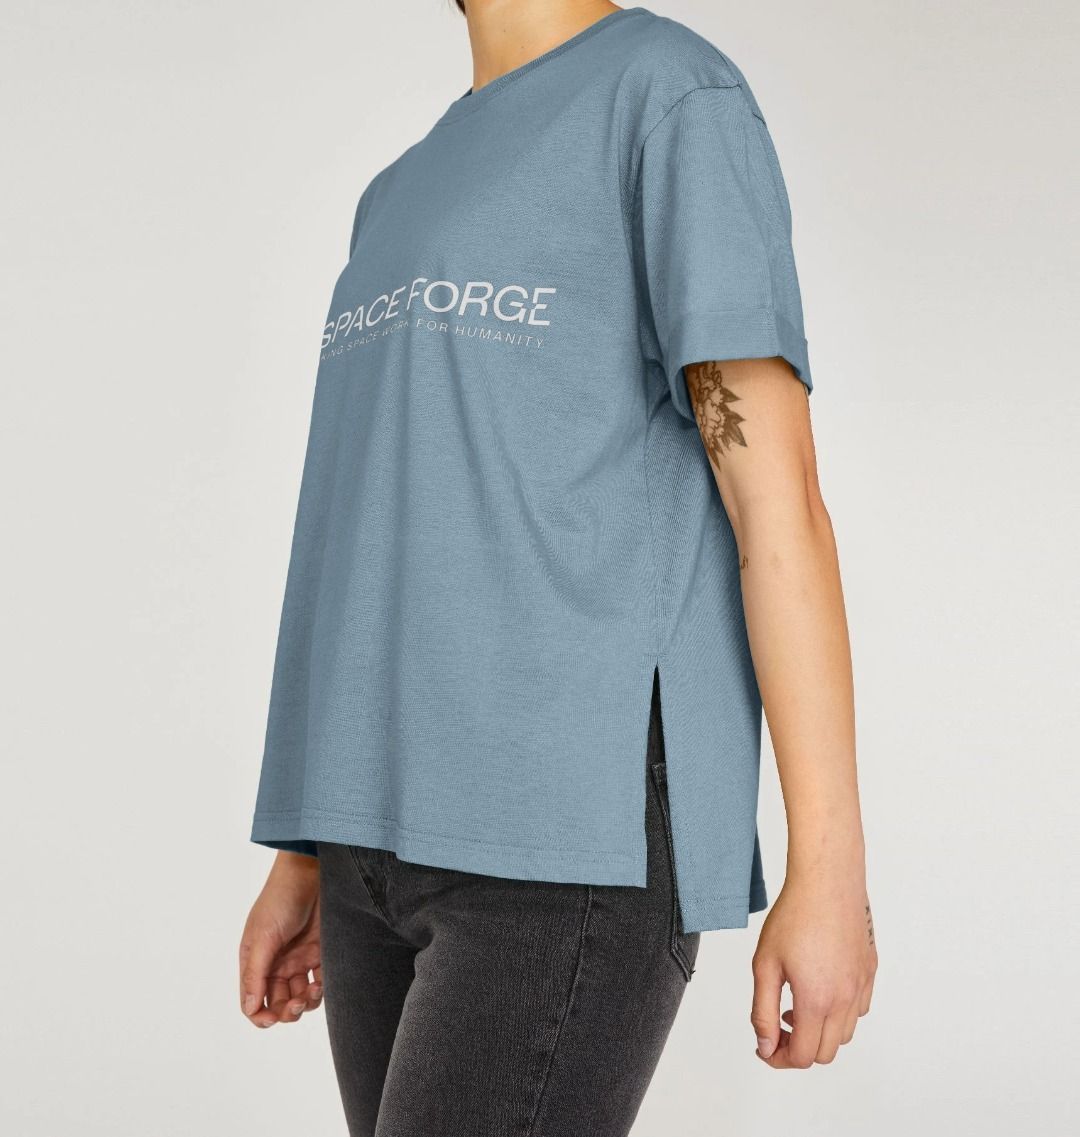 Womens Classic Relaxed Fit Tee